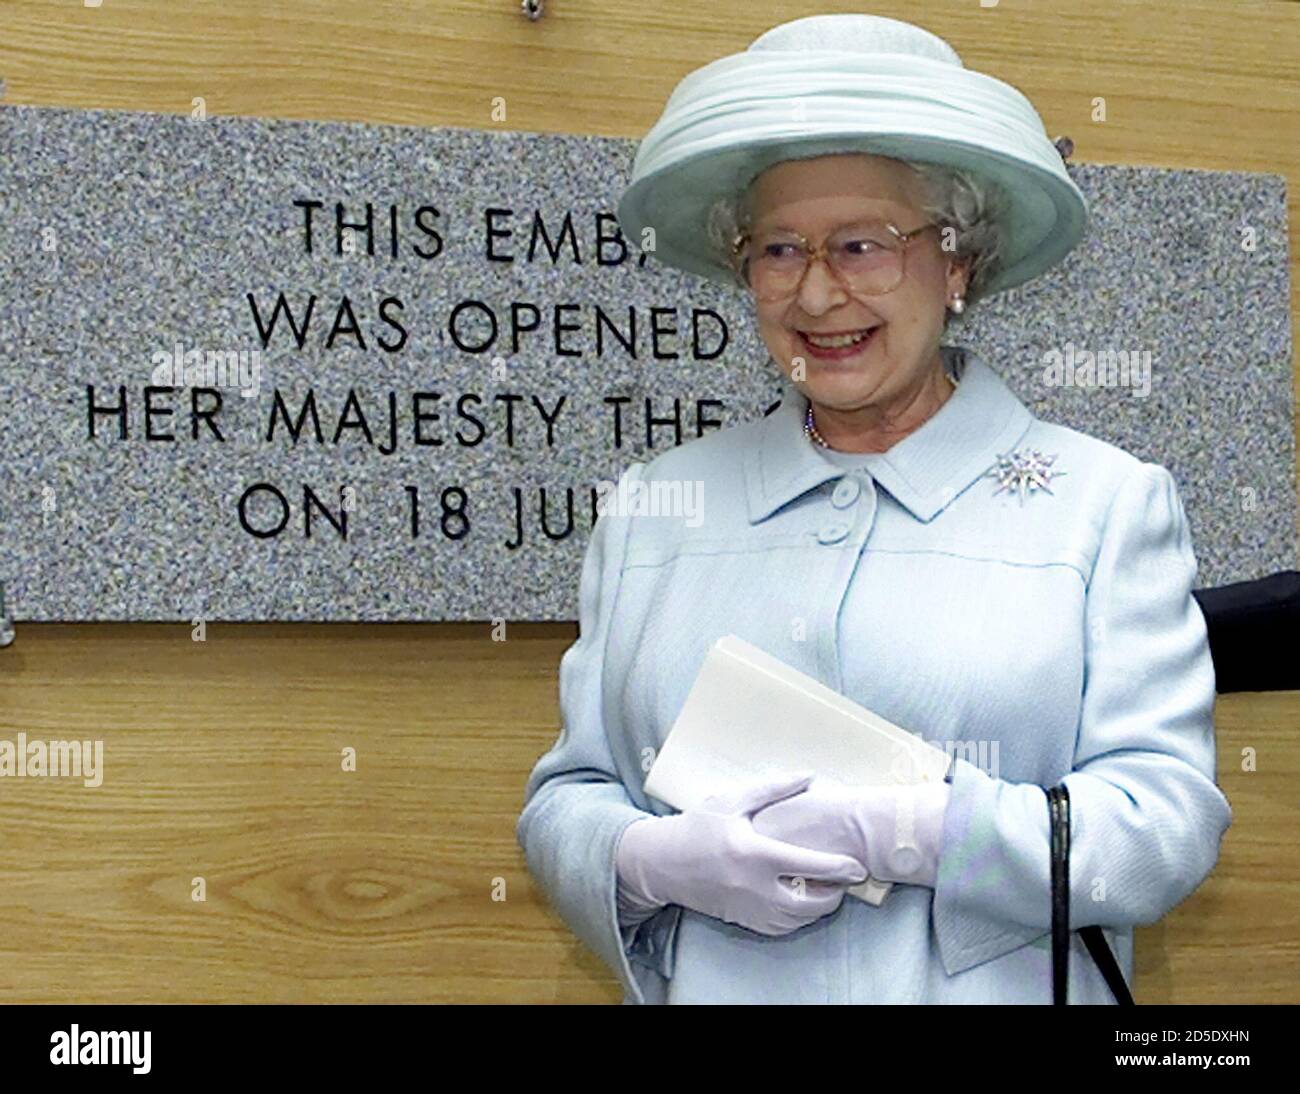 British Queen Elizabeth stands next to a plaque commemorating the opening of the new British embassy during a ceremony in Berlin July 18. The new embassy designed by British architect Michael Wilford is based on the same site as the old building which was destroyed by Allied bombers in World War Two.  MUR Stock Photo